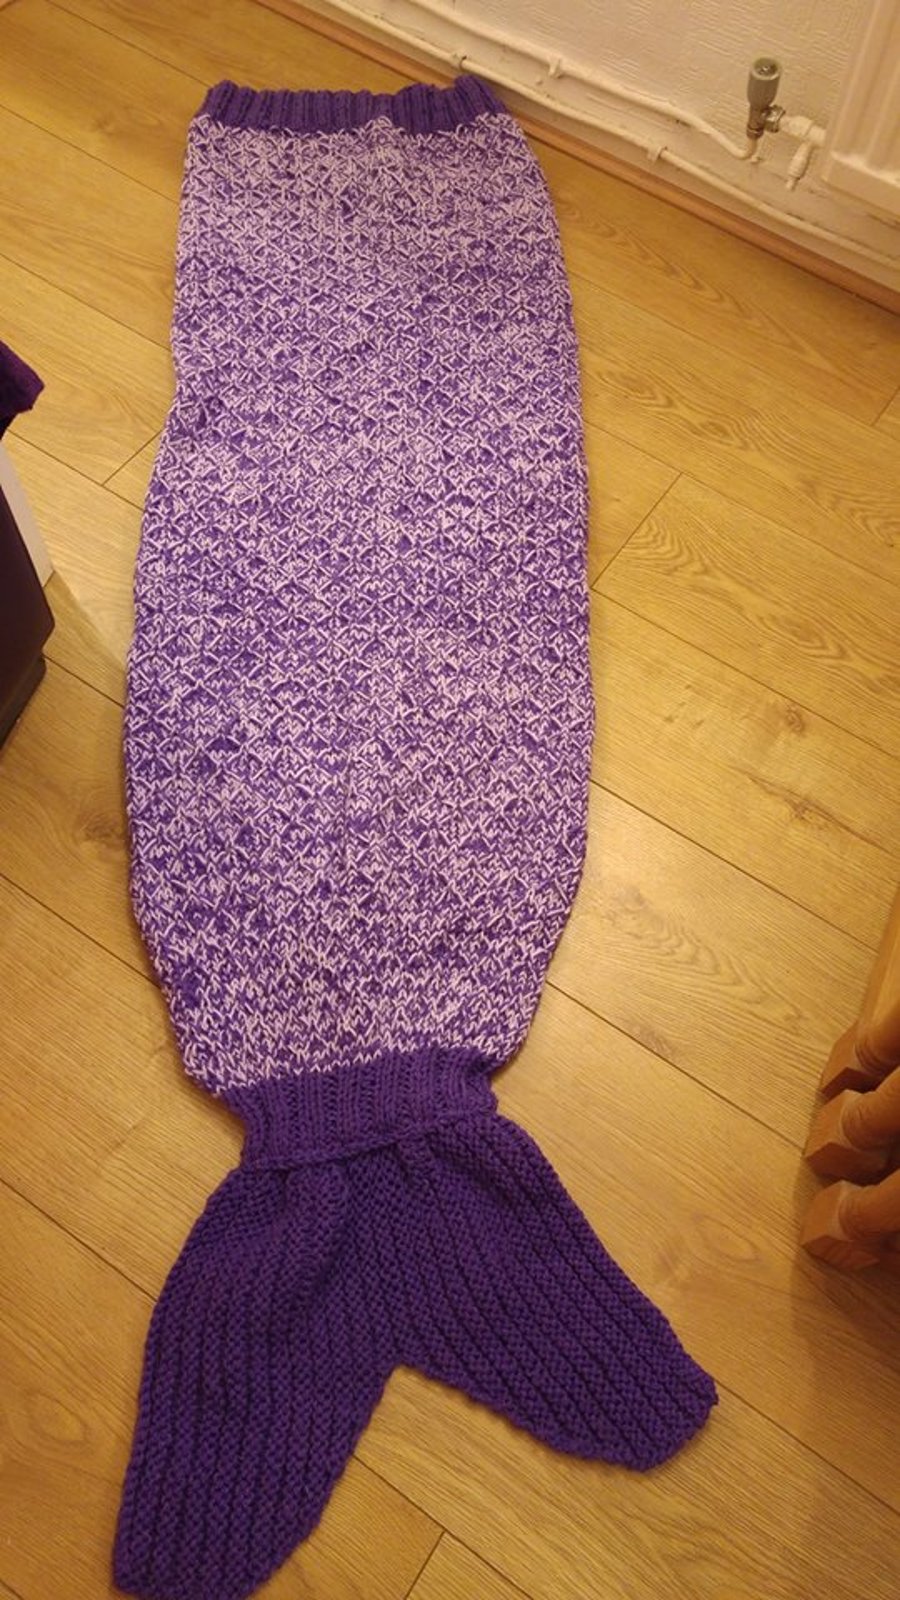 Adult size mermaid tail -  suitable for up to size 16